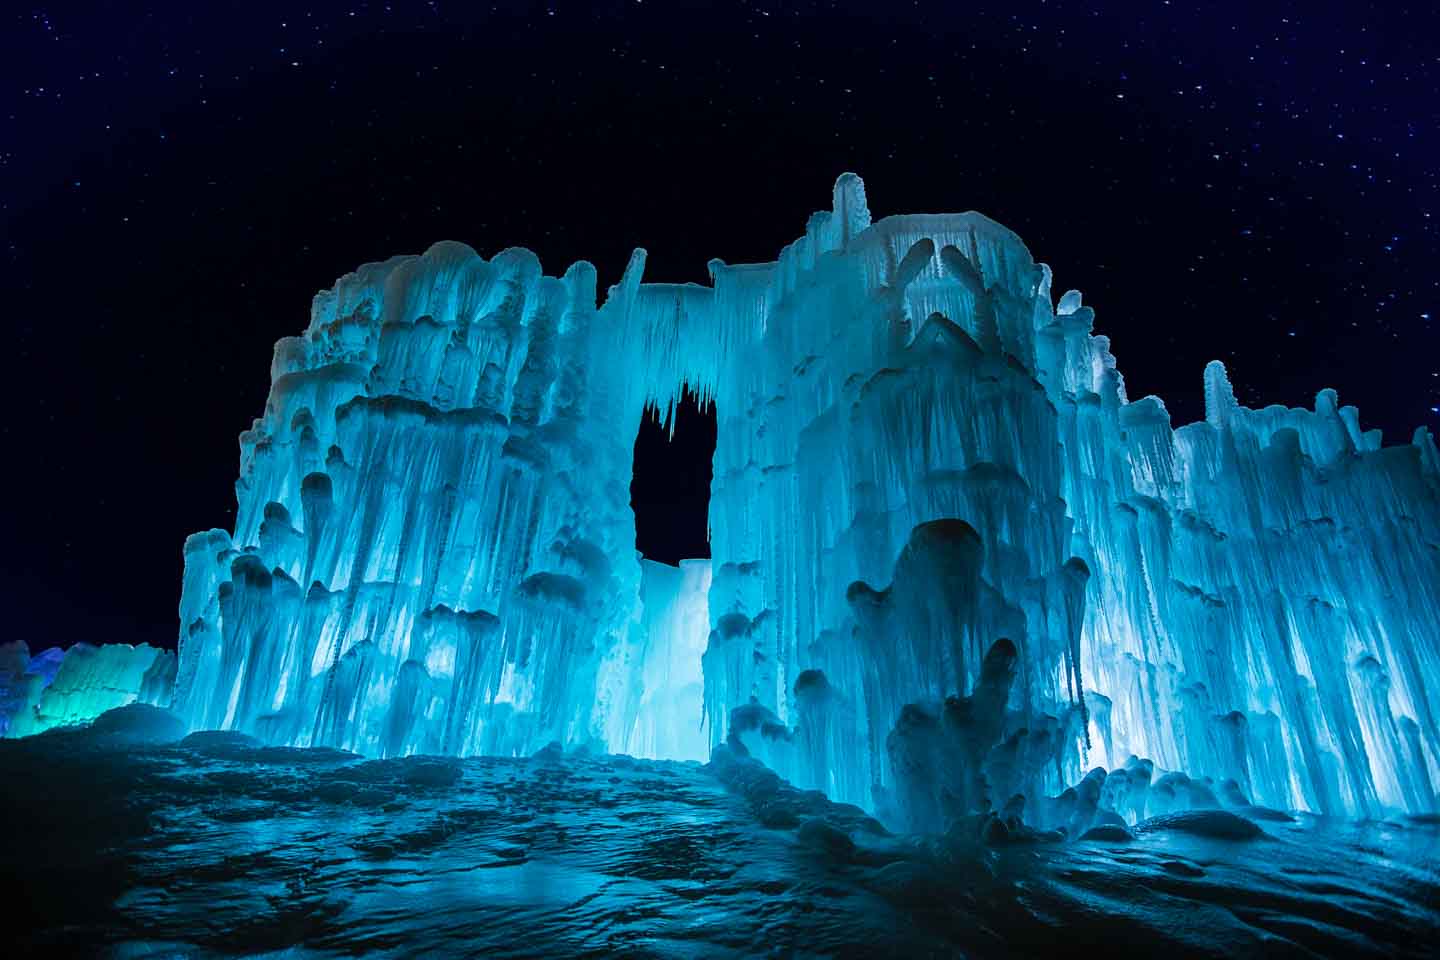 New Hampshire Ice Castle at night